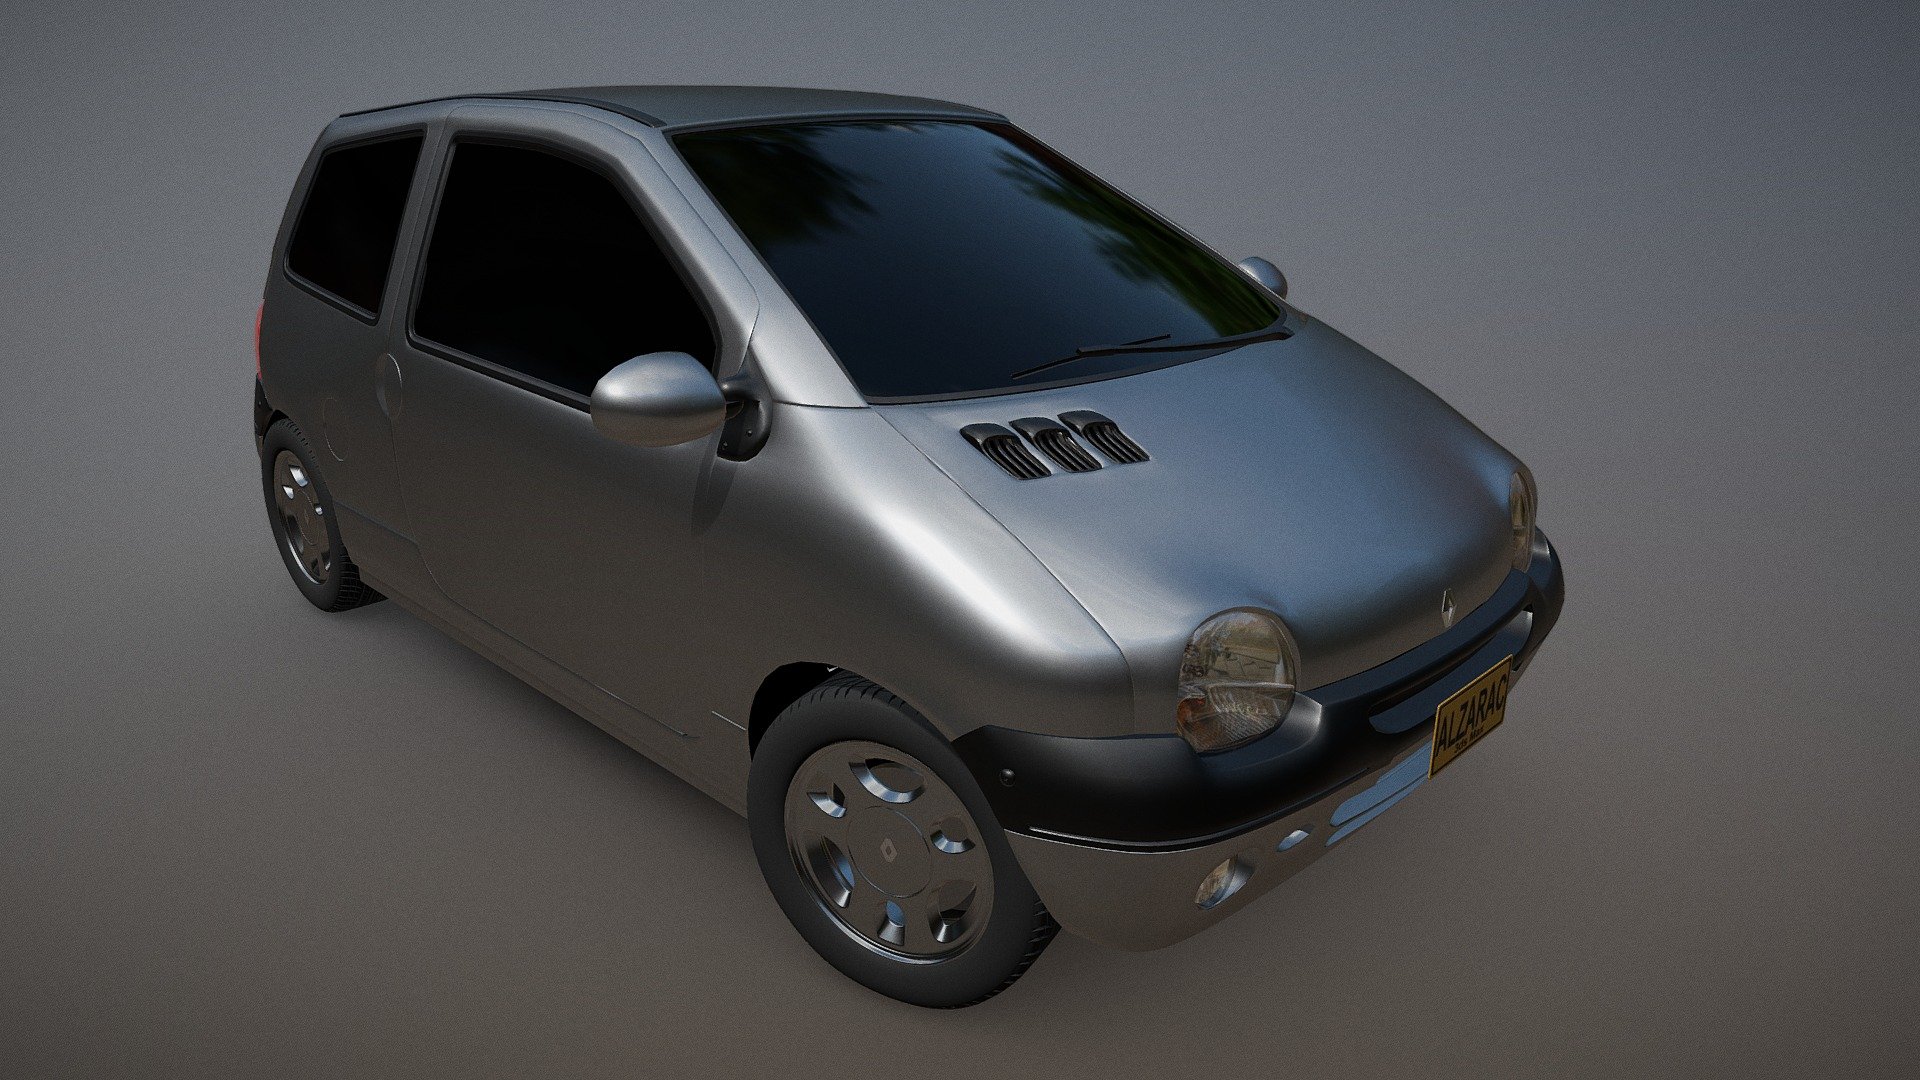 This model is based on the Renault Twingo 2005 produced in Colombia. It was modeled in 3ds max.

PS: There are some missing things like the antena, the rear wipher and the door handlers.

I hope you like it 3d model